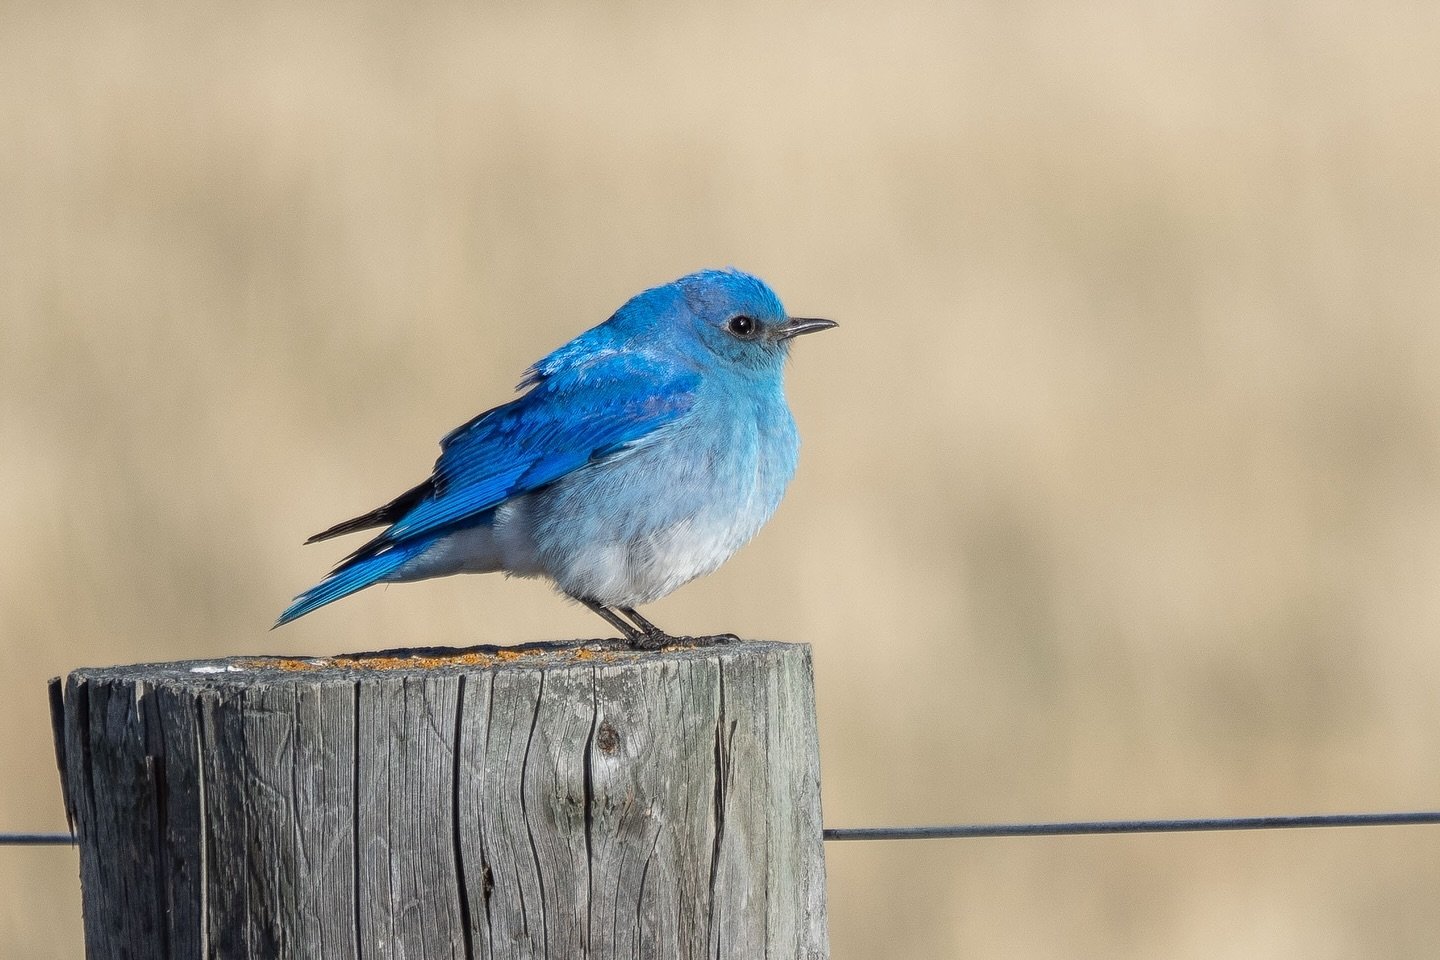 It&rsquo;s that time of year again - mountain bluebirds are busy building nests.
.
#mountainbluebird #nestboxmonitoring